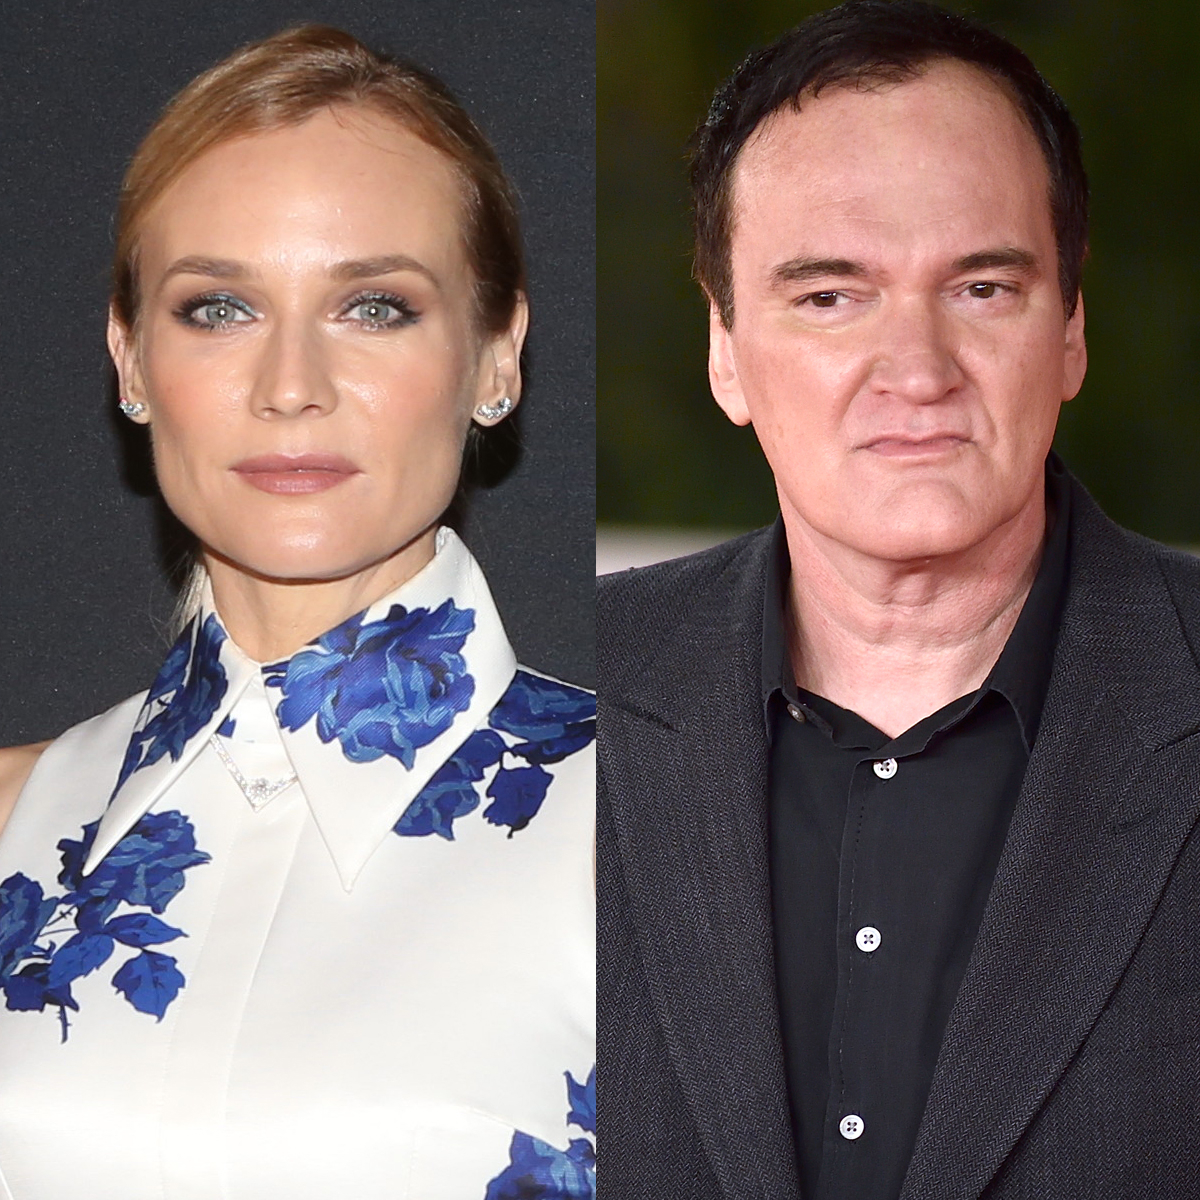 Diane Kruger Almost Didn't Star In Inglorious Basterds